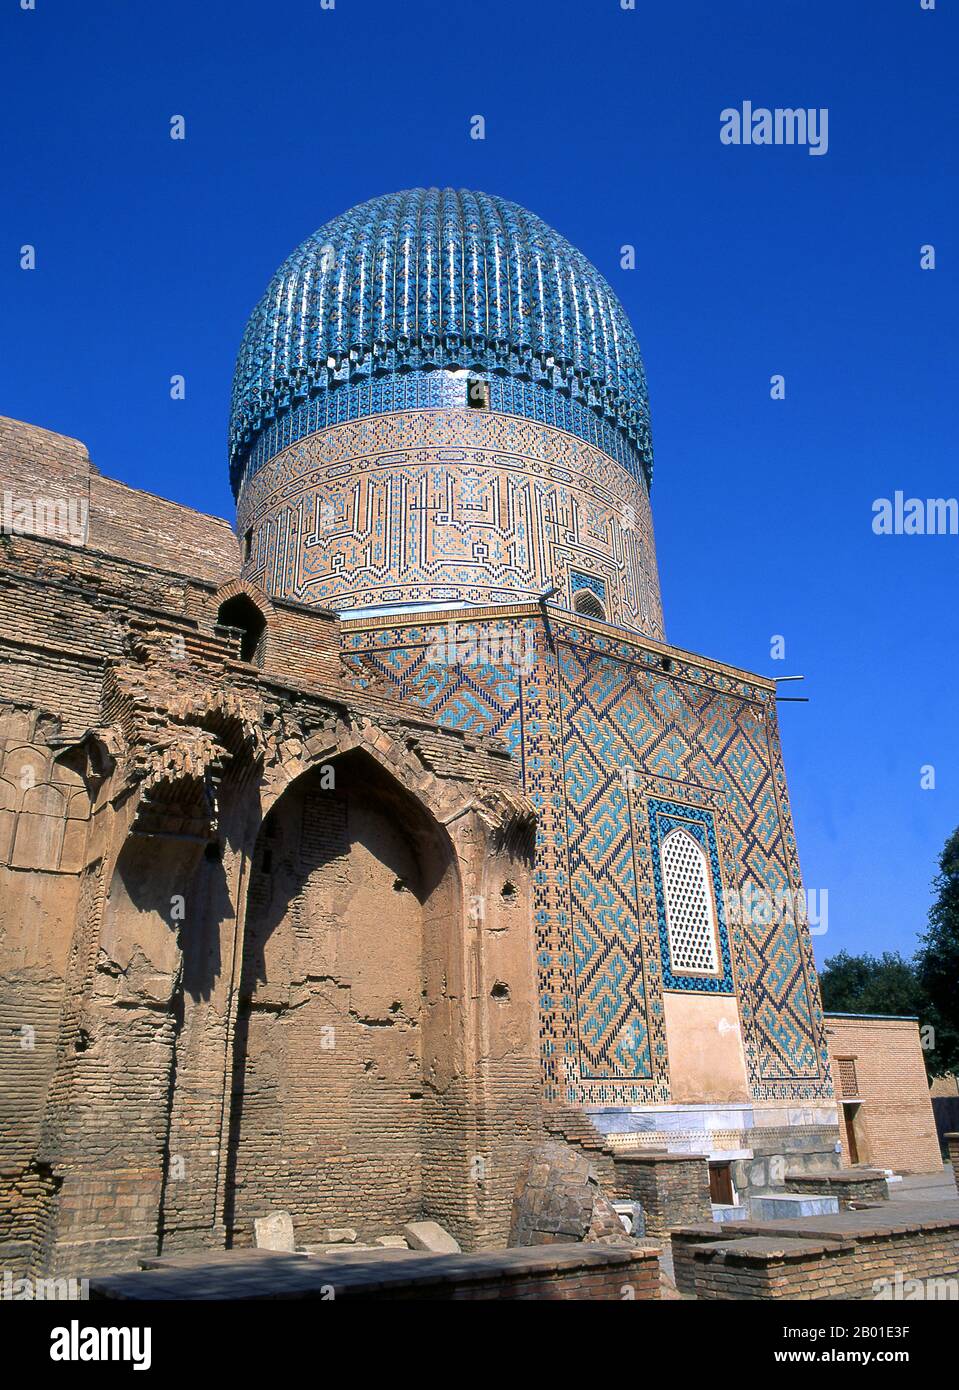 Uzbekistan: Timurid fluted dome, Gur-e Amir mausoleum, Samarkand.  The Gūr-e Amīr or Guri Amir (Persian: گورِ امیر) is the mausoleum of the Asian conqueror Tamerlane (also known as Timur) in Samarkand, Uzbekistan. It occupies an important place in the history of Persian architecture as the precursor and model for later great Mughal architecture tombs, including Humayun's Tomb in Delhi and the Taj Mahal in Agra, built by Timur's descendants, the ruling Mughal dynasty of North India. It has been heavily restored.  Gur-e Amir is Persian for 'Tomb of the King'. Stock Photo